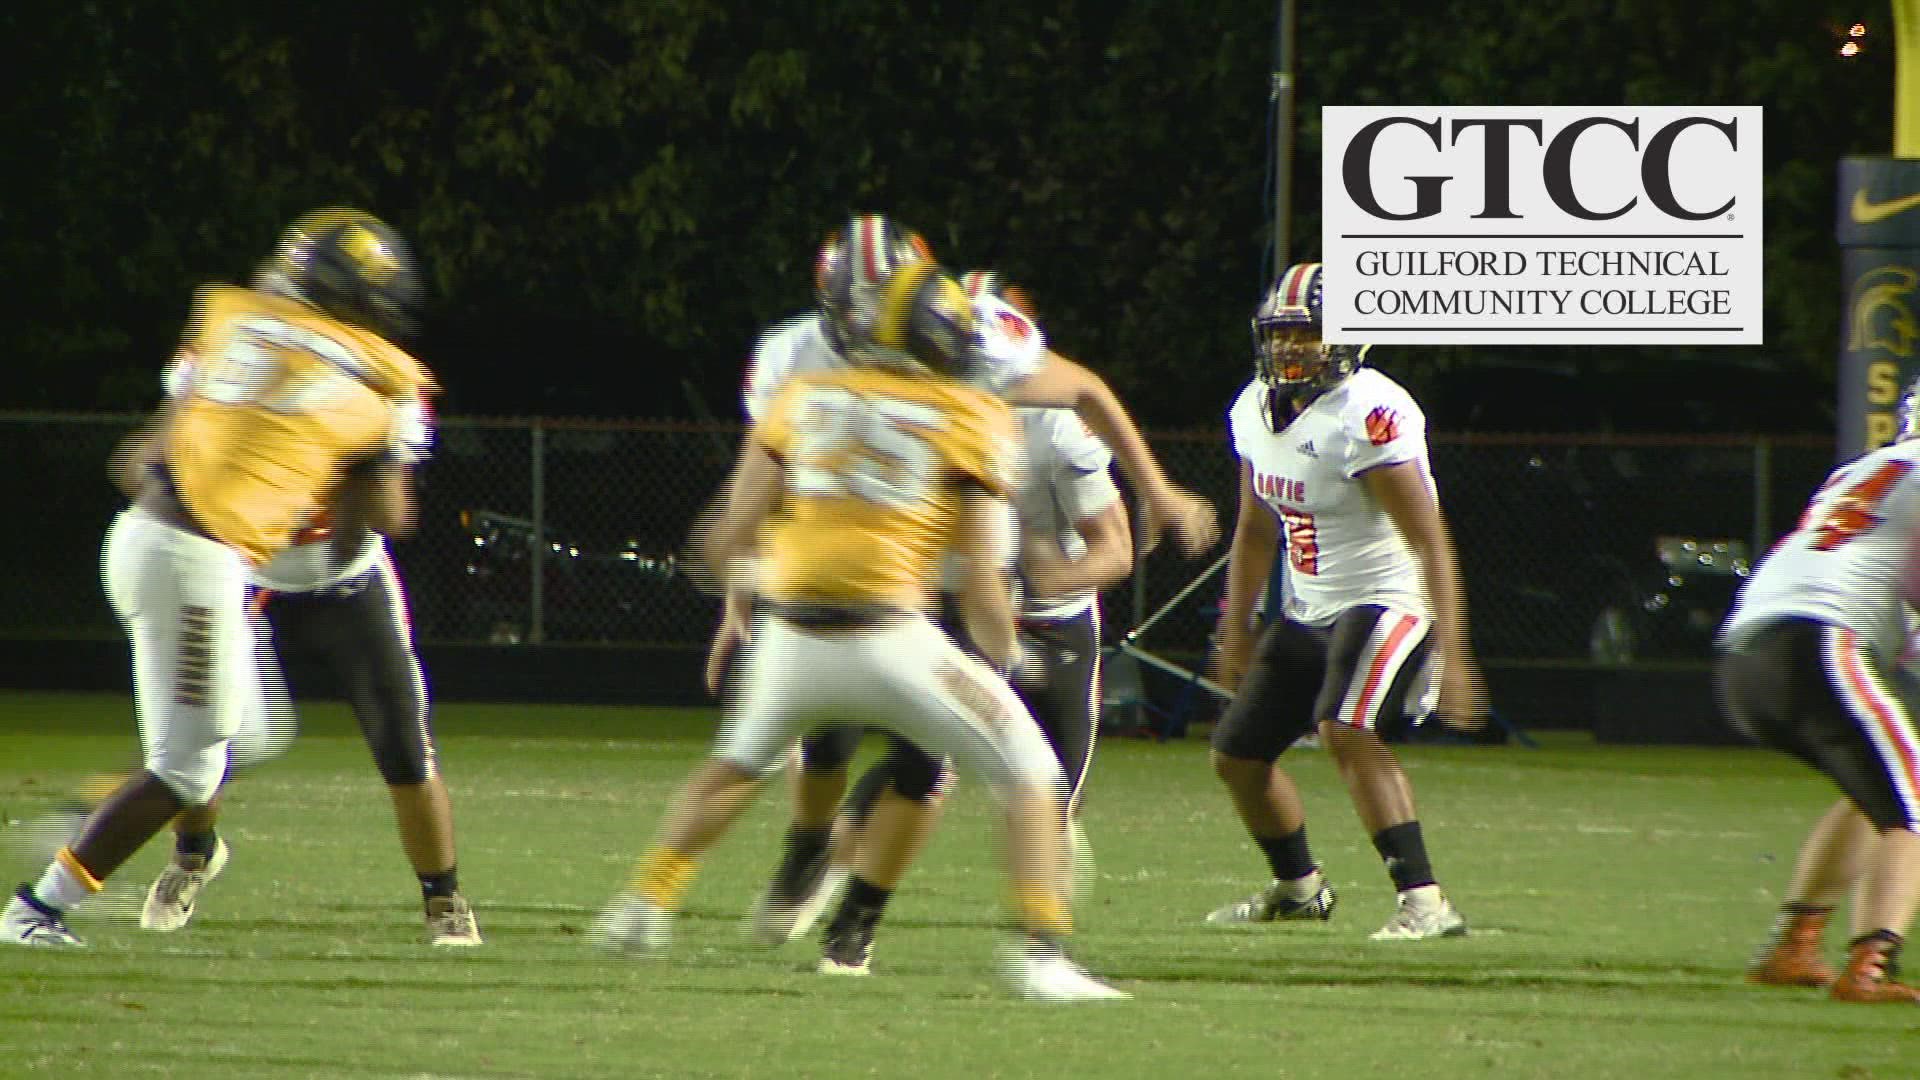 Davie County RB Tate Carney caps off our GTCC Drive of the Week with a TD run in Monday's win over Mount Tabor